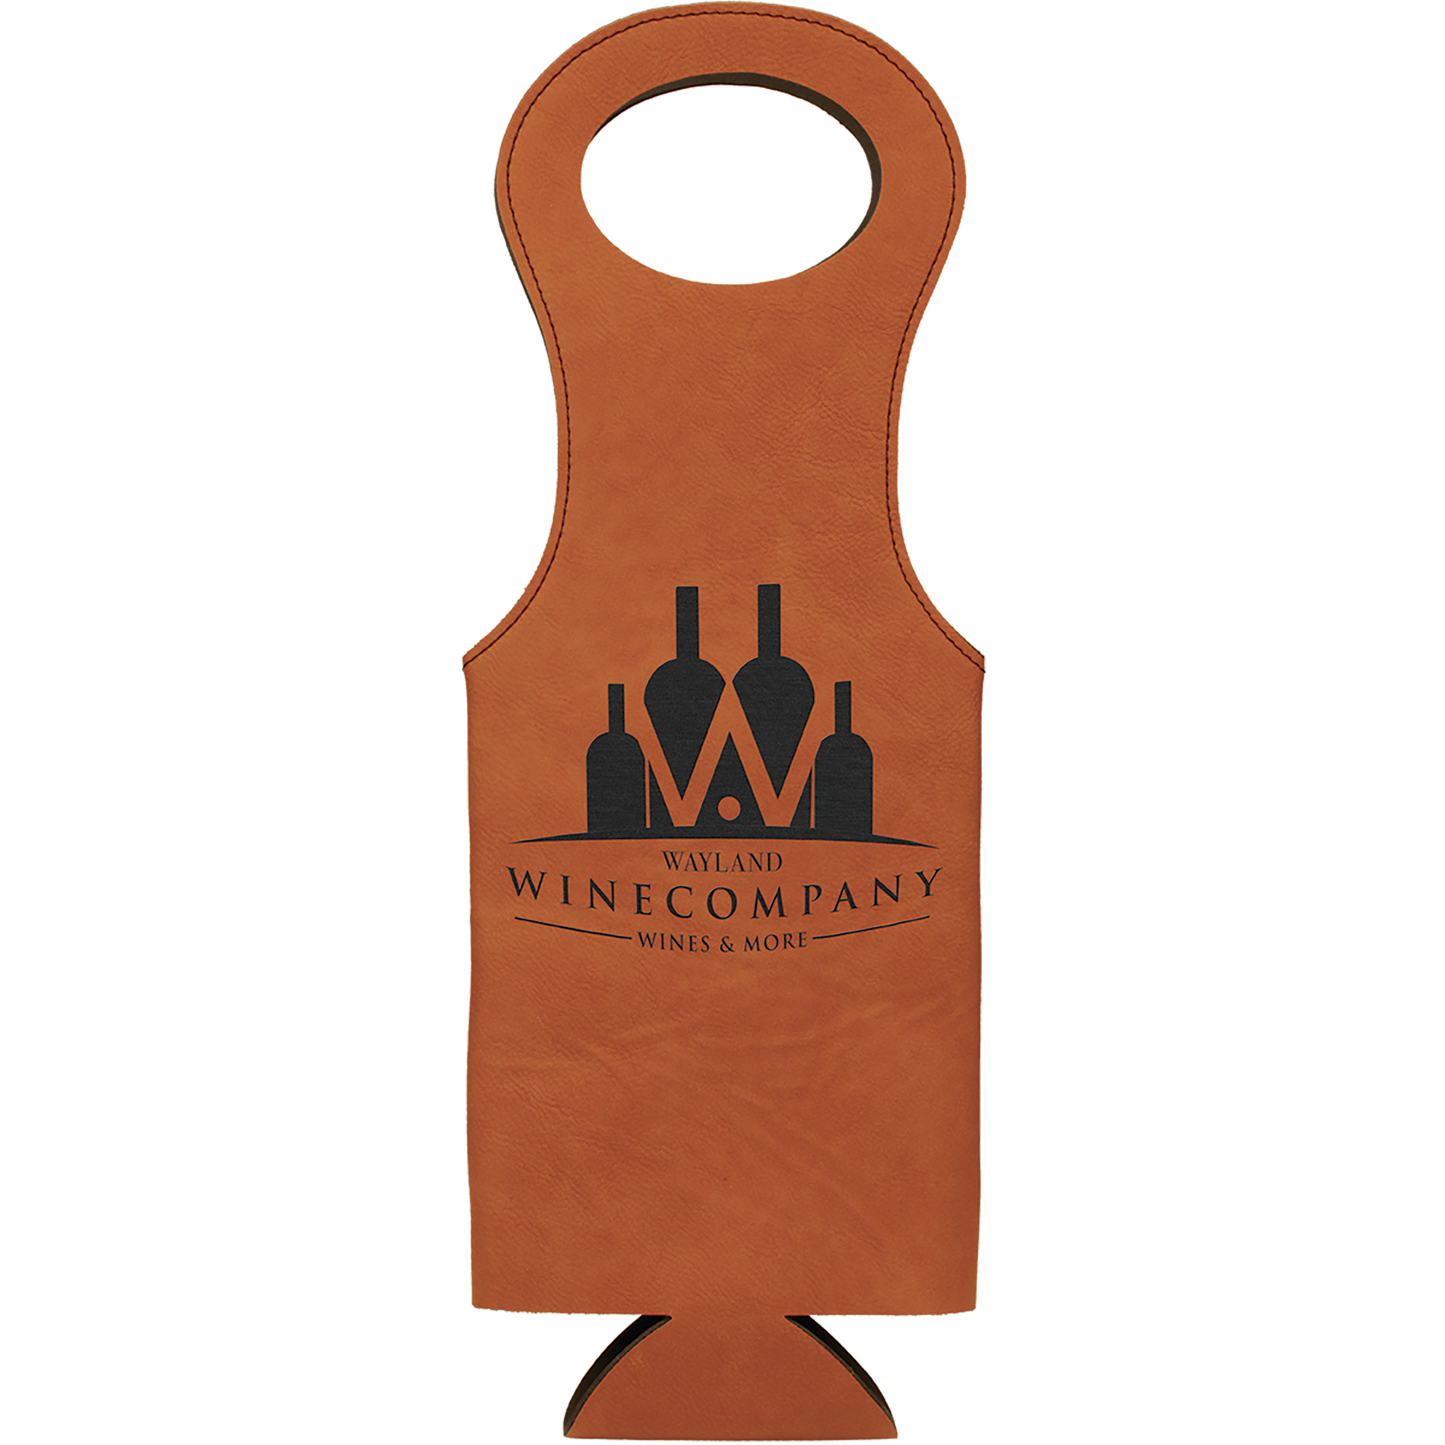 Personalized Wine Bag